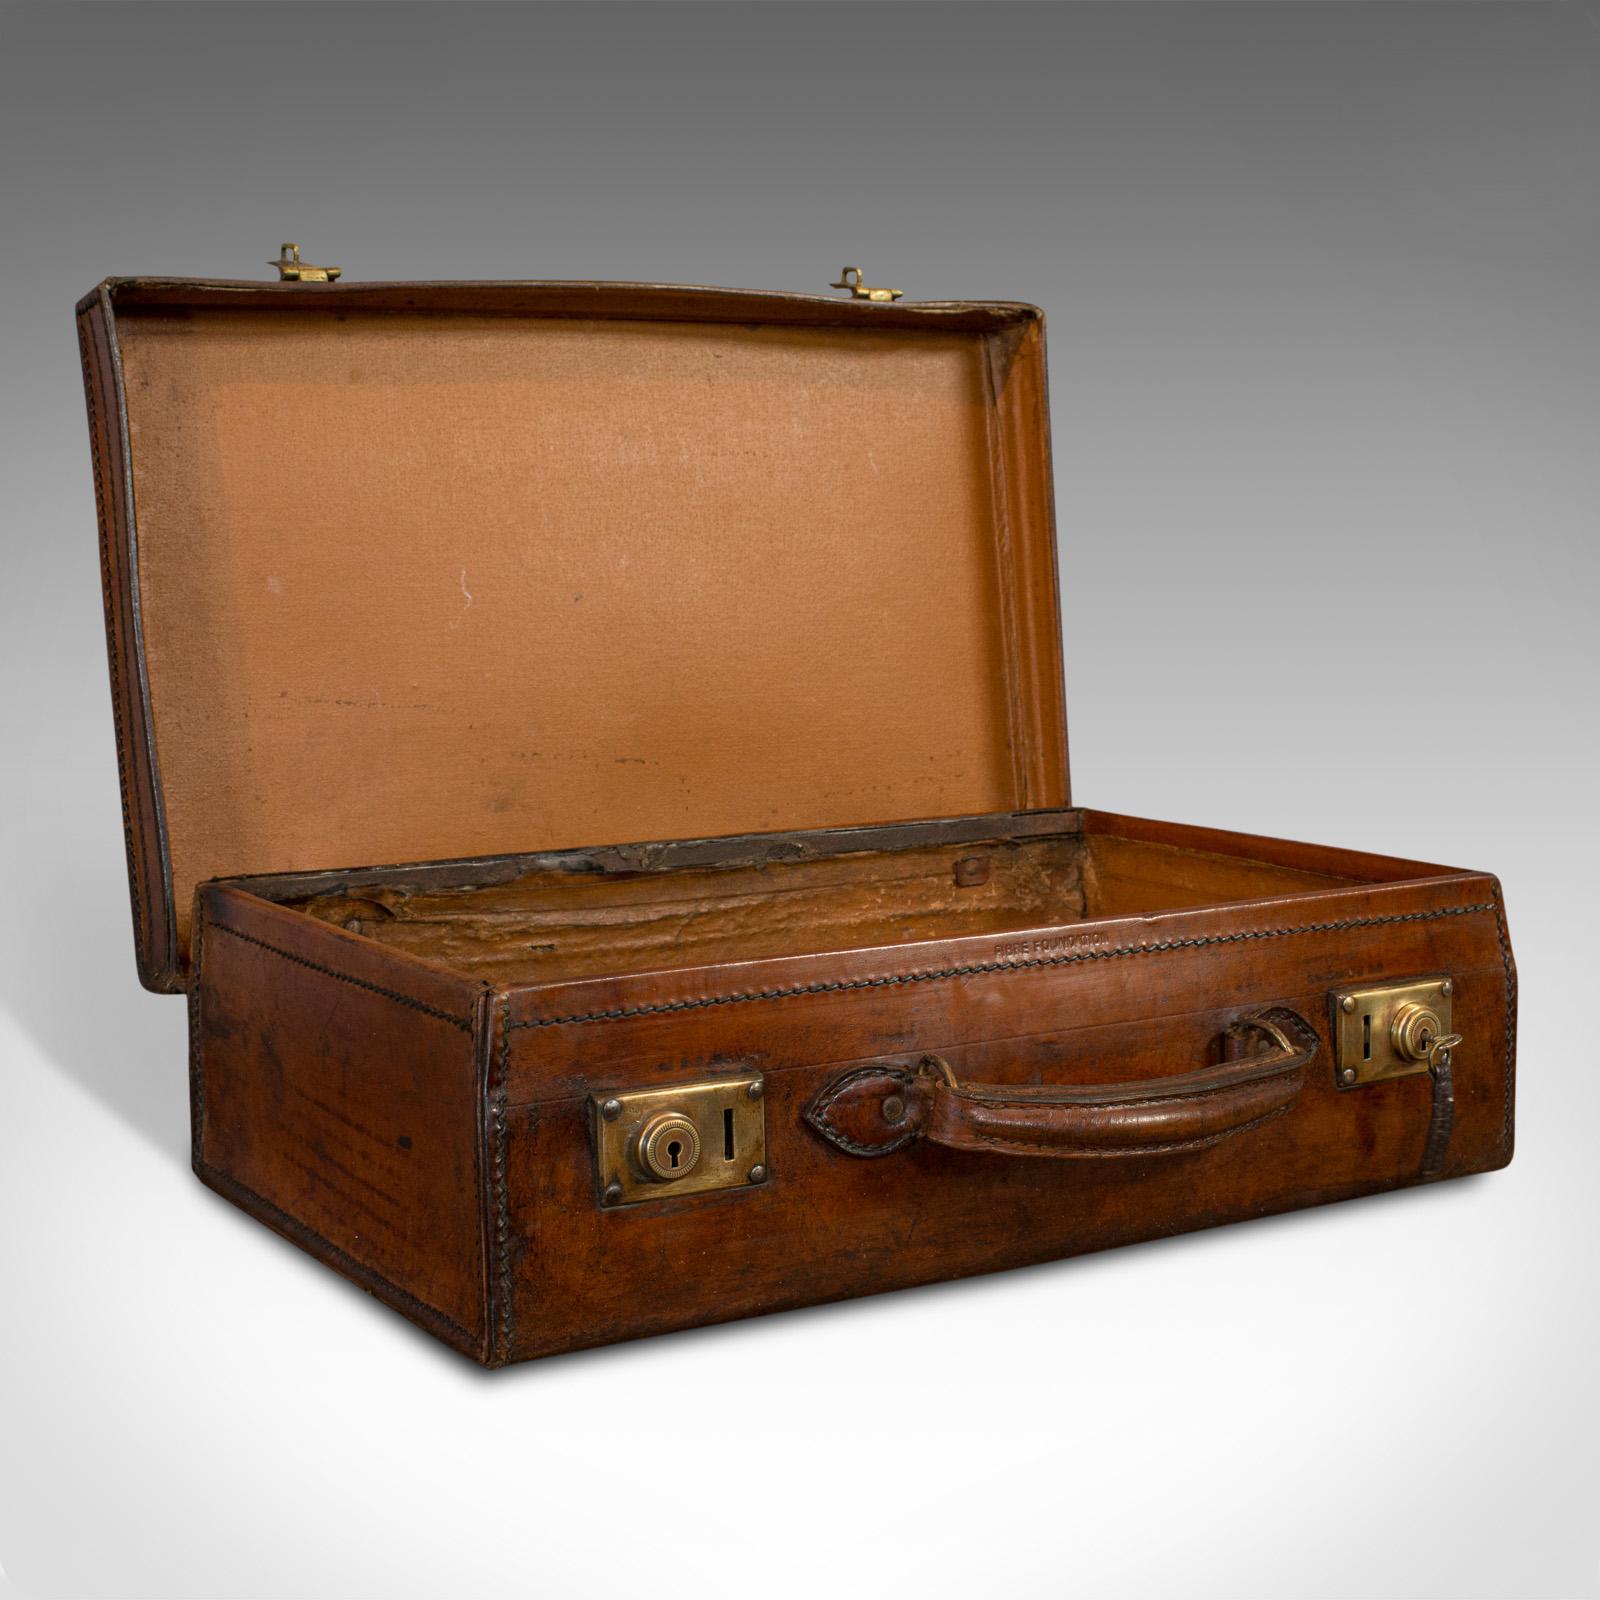 This is an antique travel case. An English, leather banker's suitcase, dating to the Edwardian period, circa 1910.

Carry documents in style
Displays a desirable aged patina
Leather shows appealing russet hues

Generously sized, comfortable